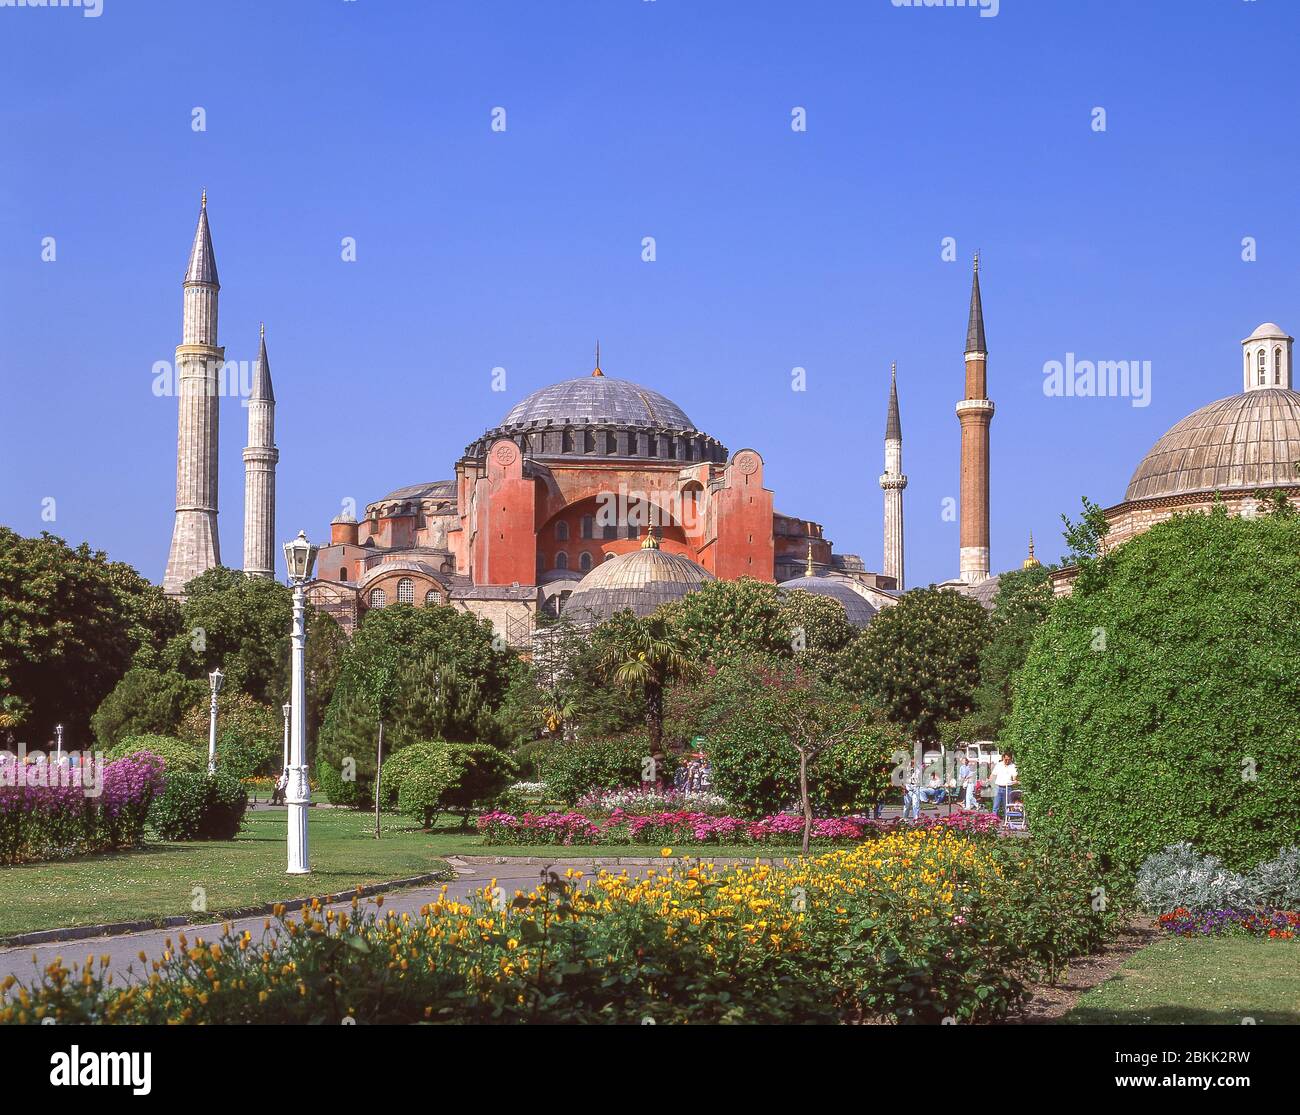 Haghi Sophia (Church of the Holy Wisdom) from Sultan Ahmet Park, Fatih District, Istanbul, Republic of Turkey Stock Photo